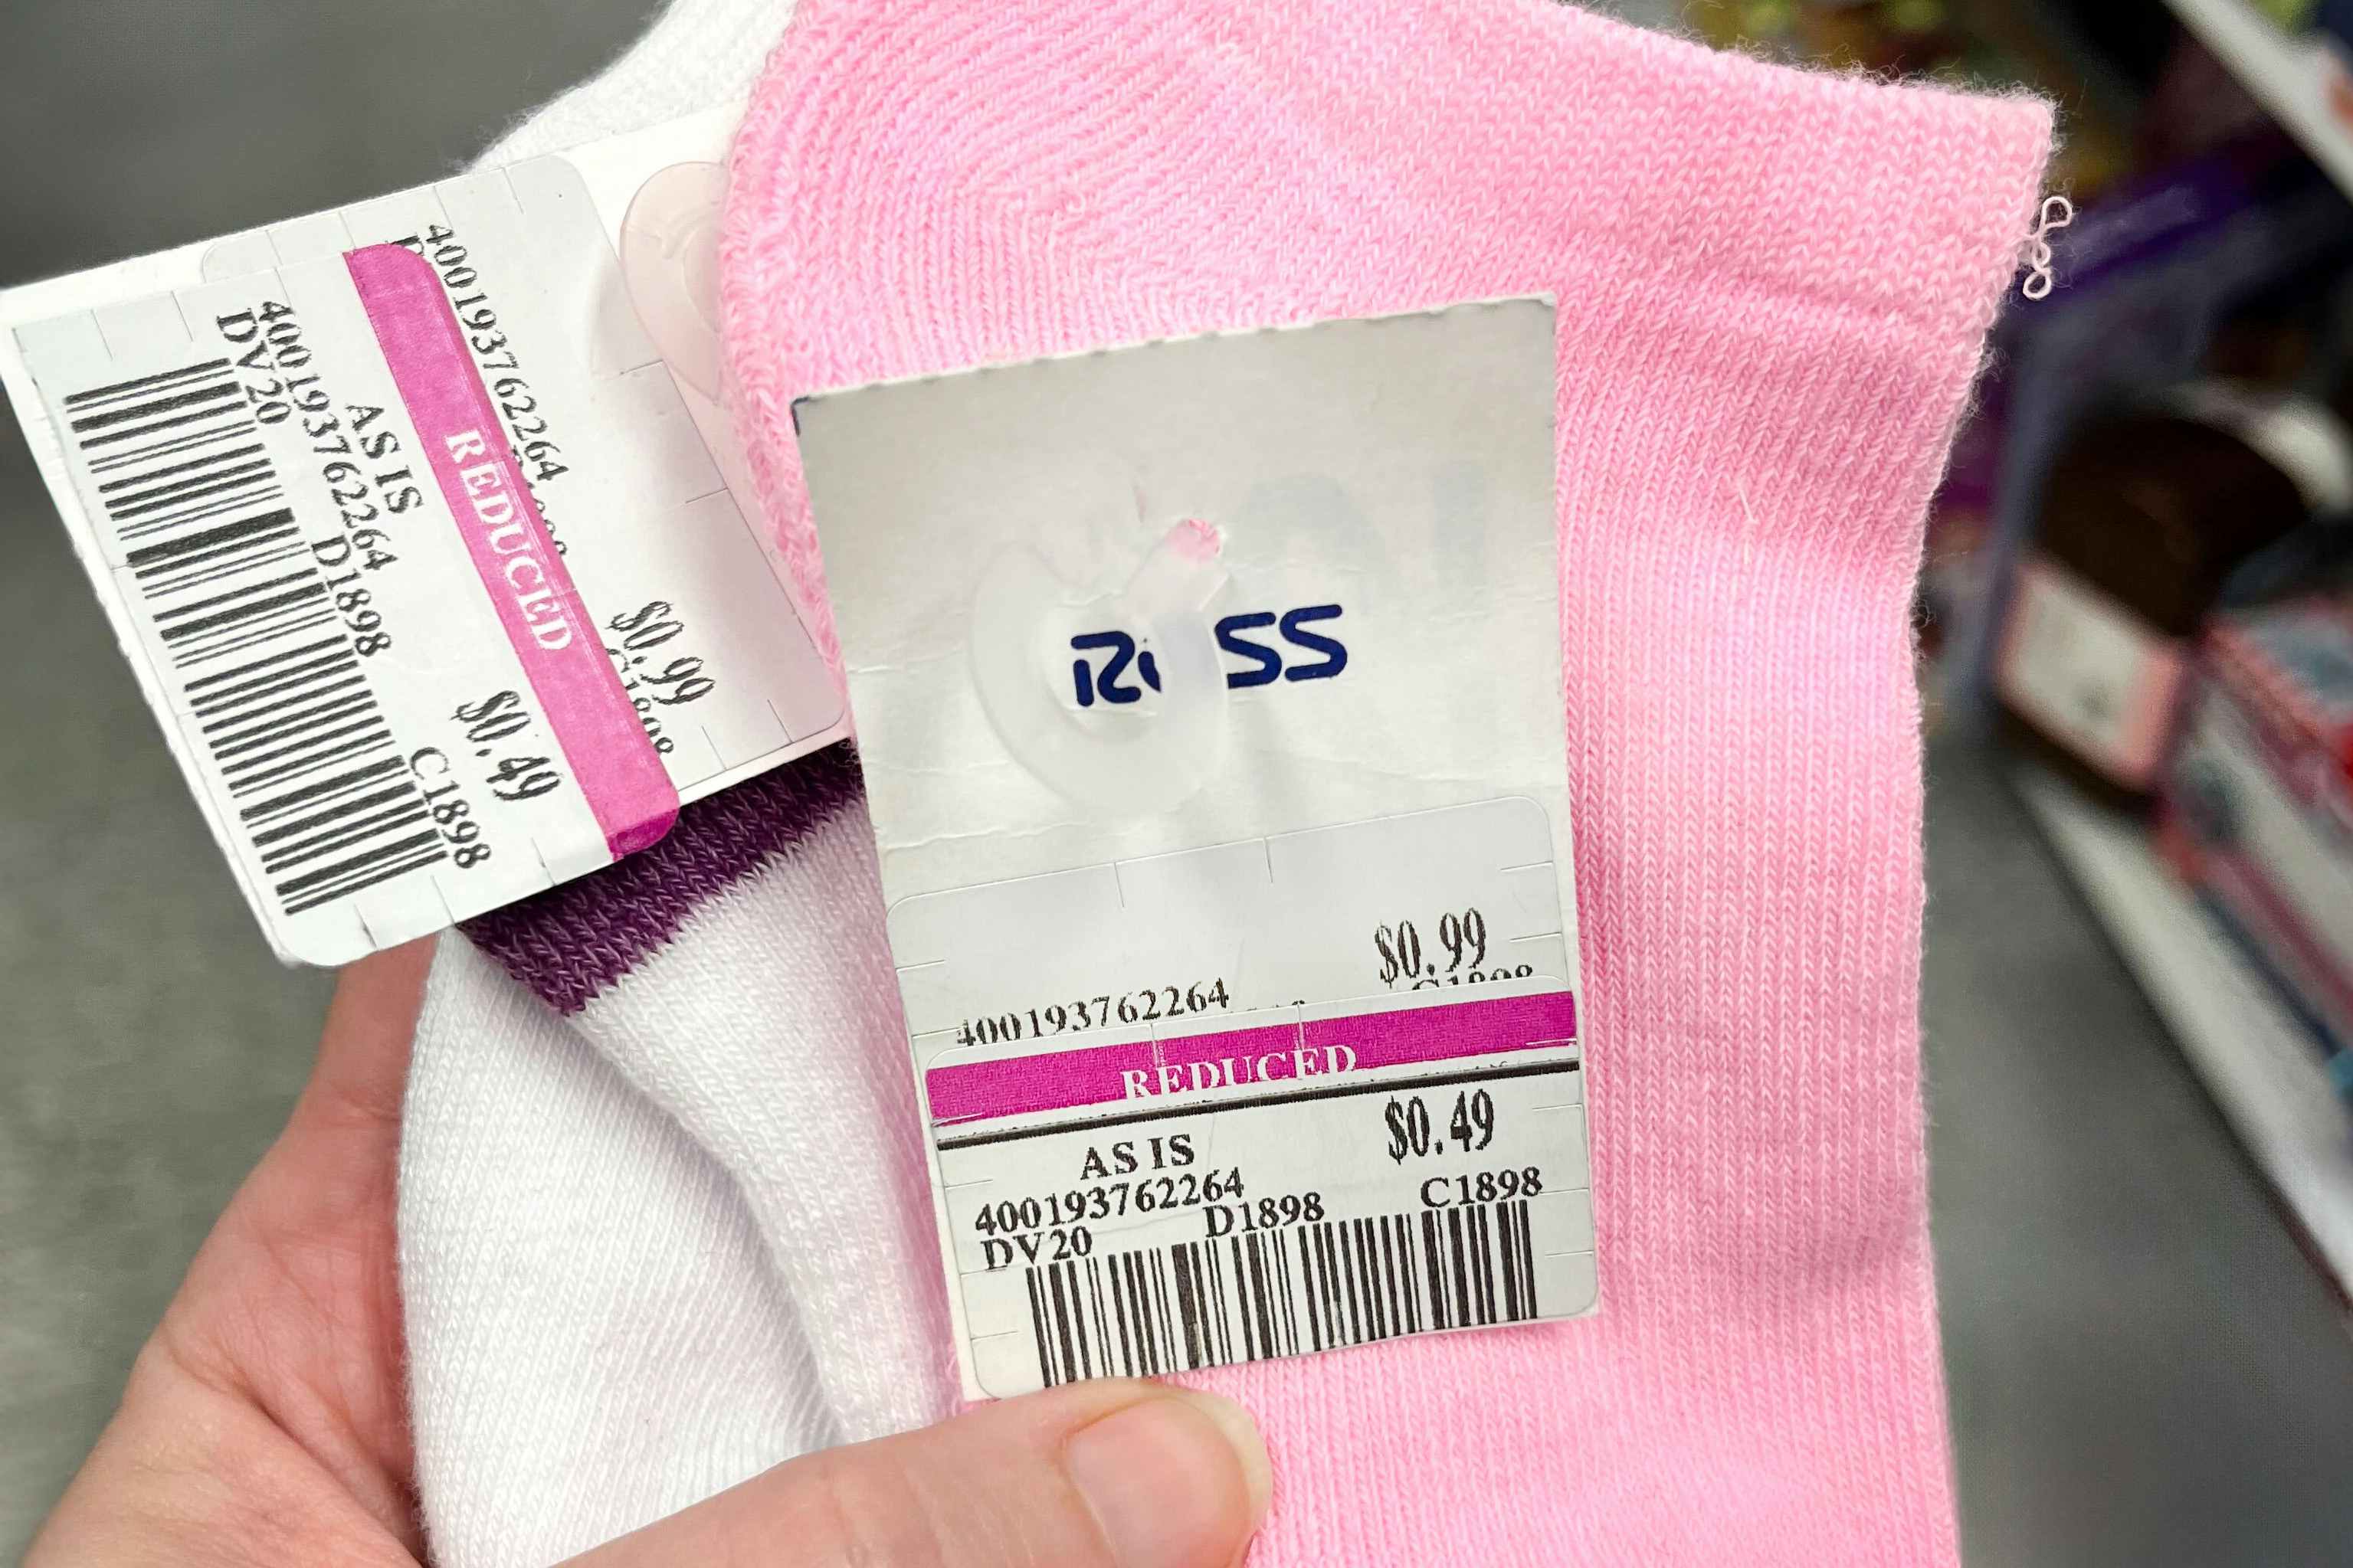 socks with a $0.49 price tag at ross